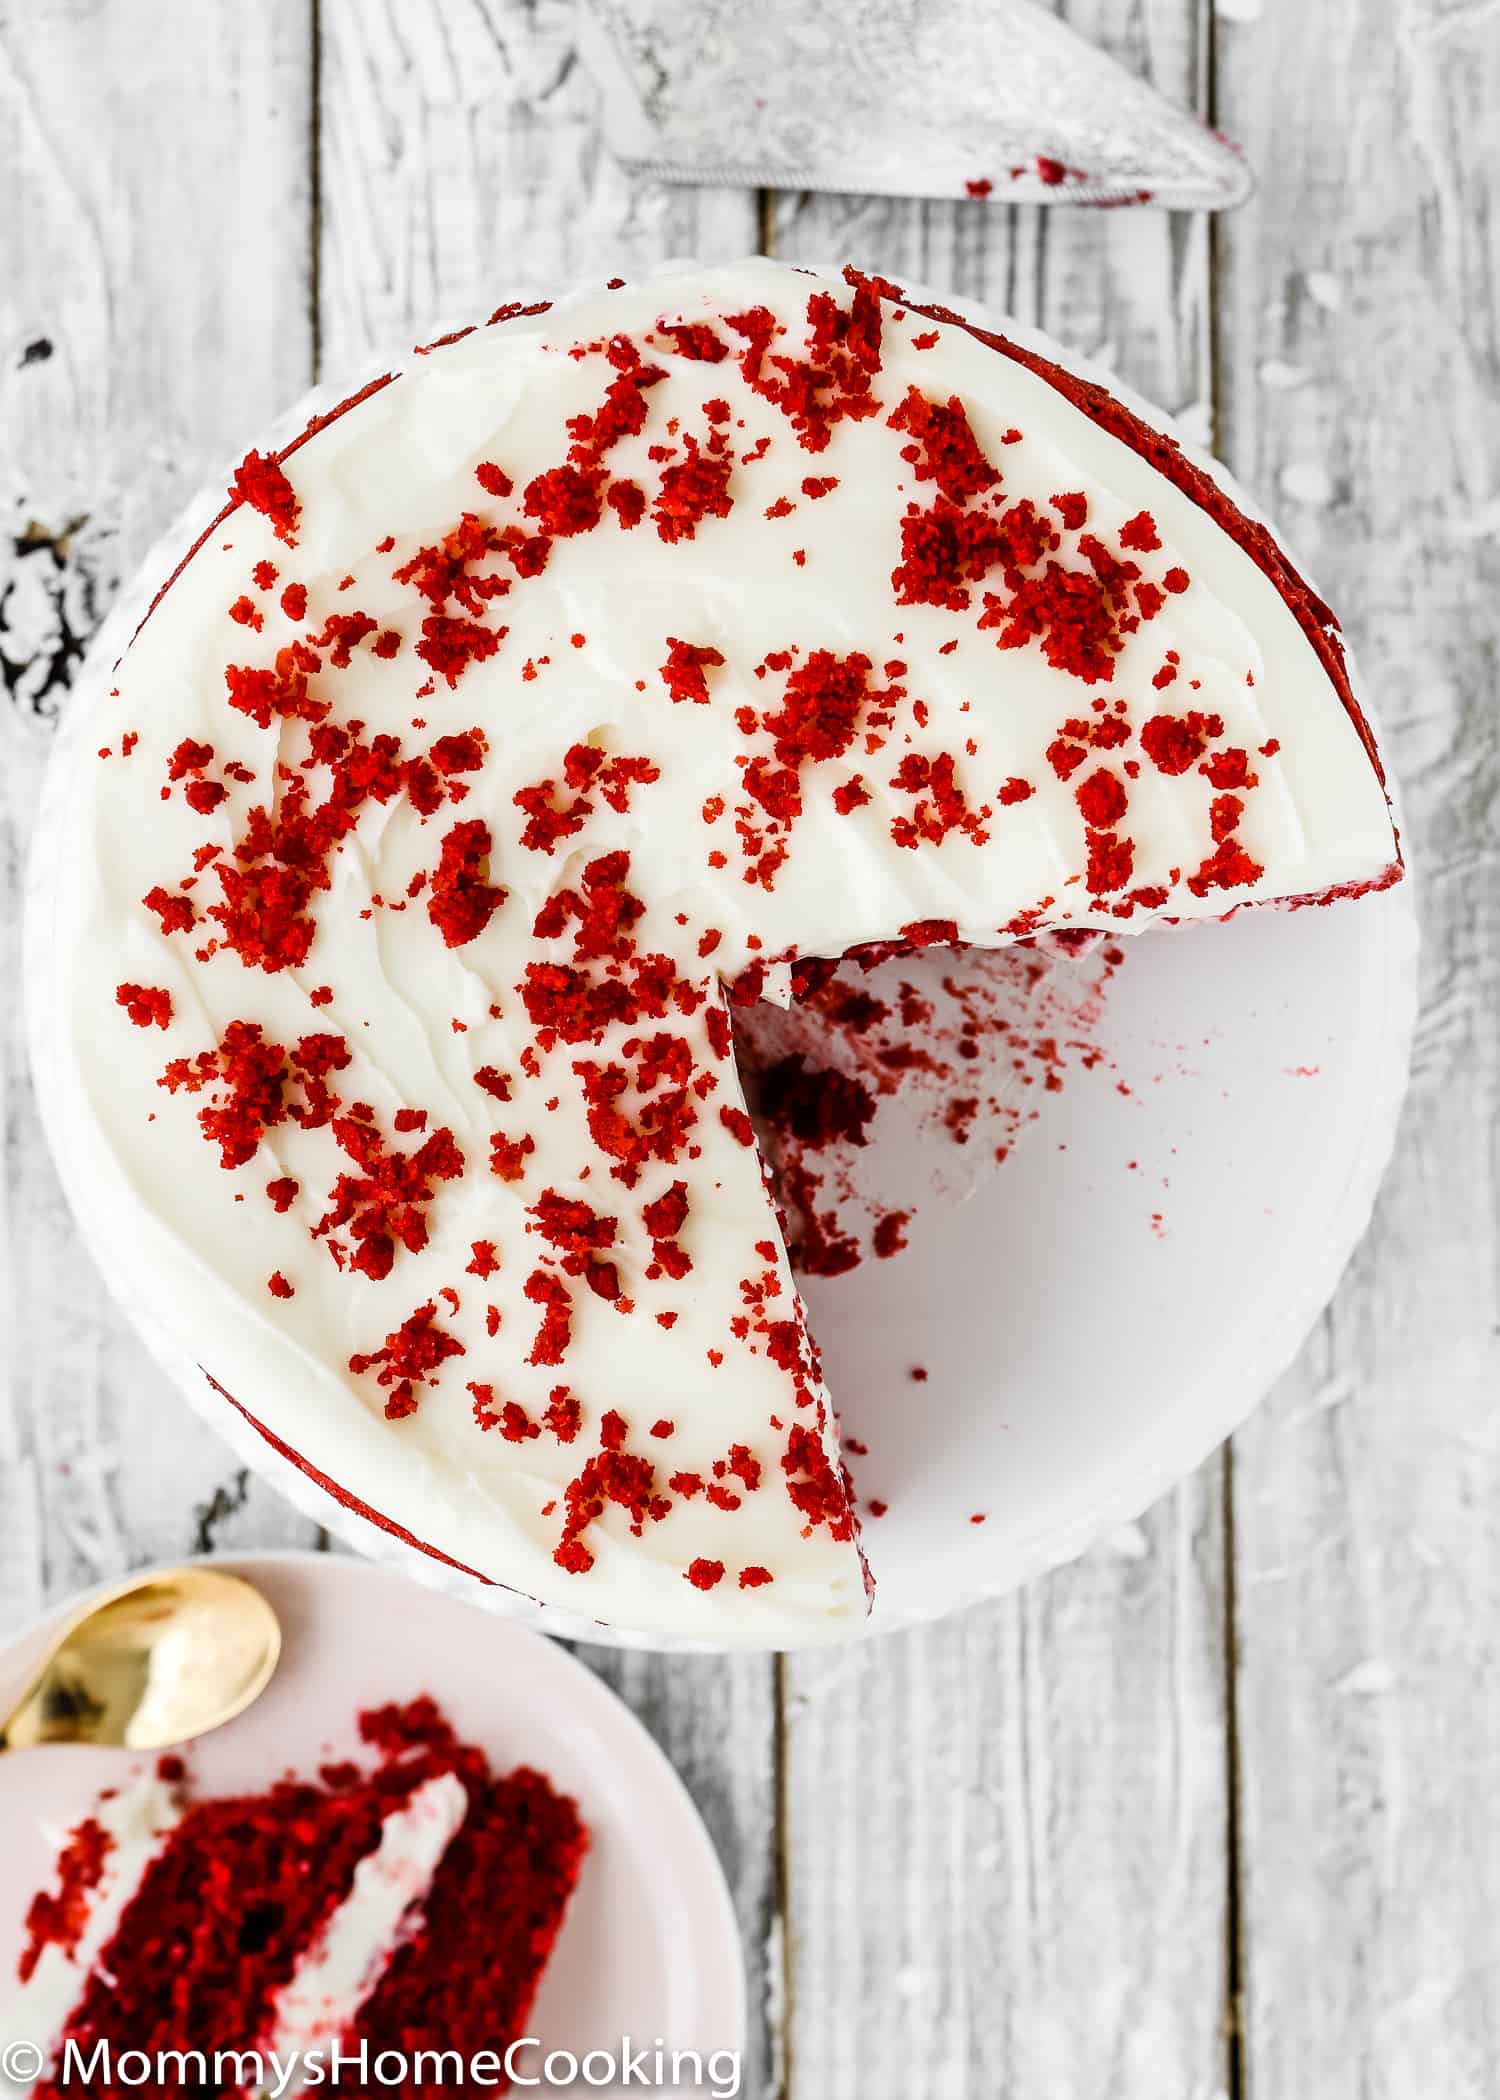 Overhead view of a sliced red velvet cake with cream cheese frosting.